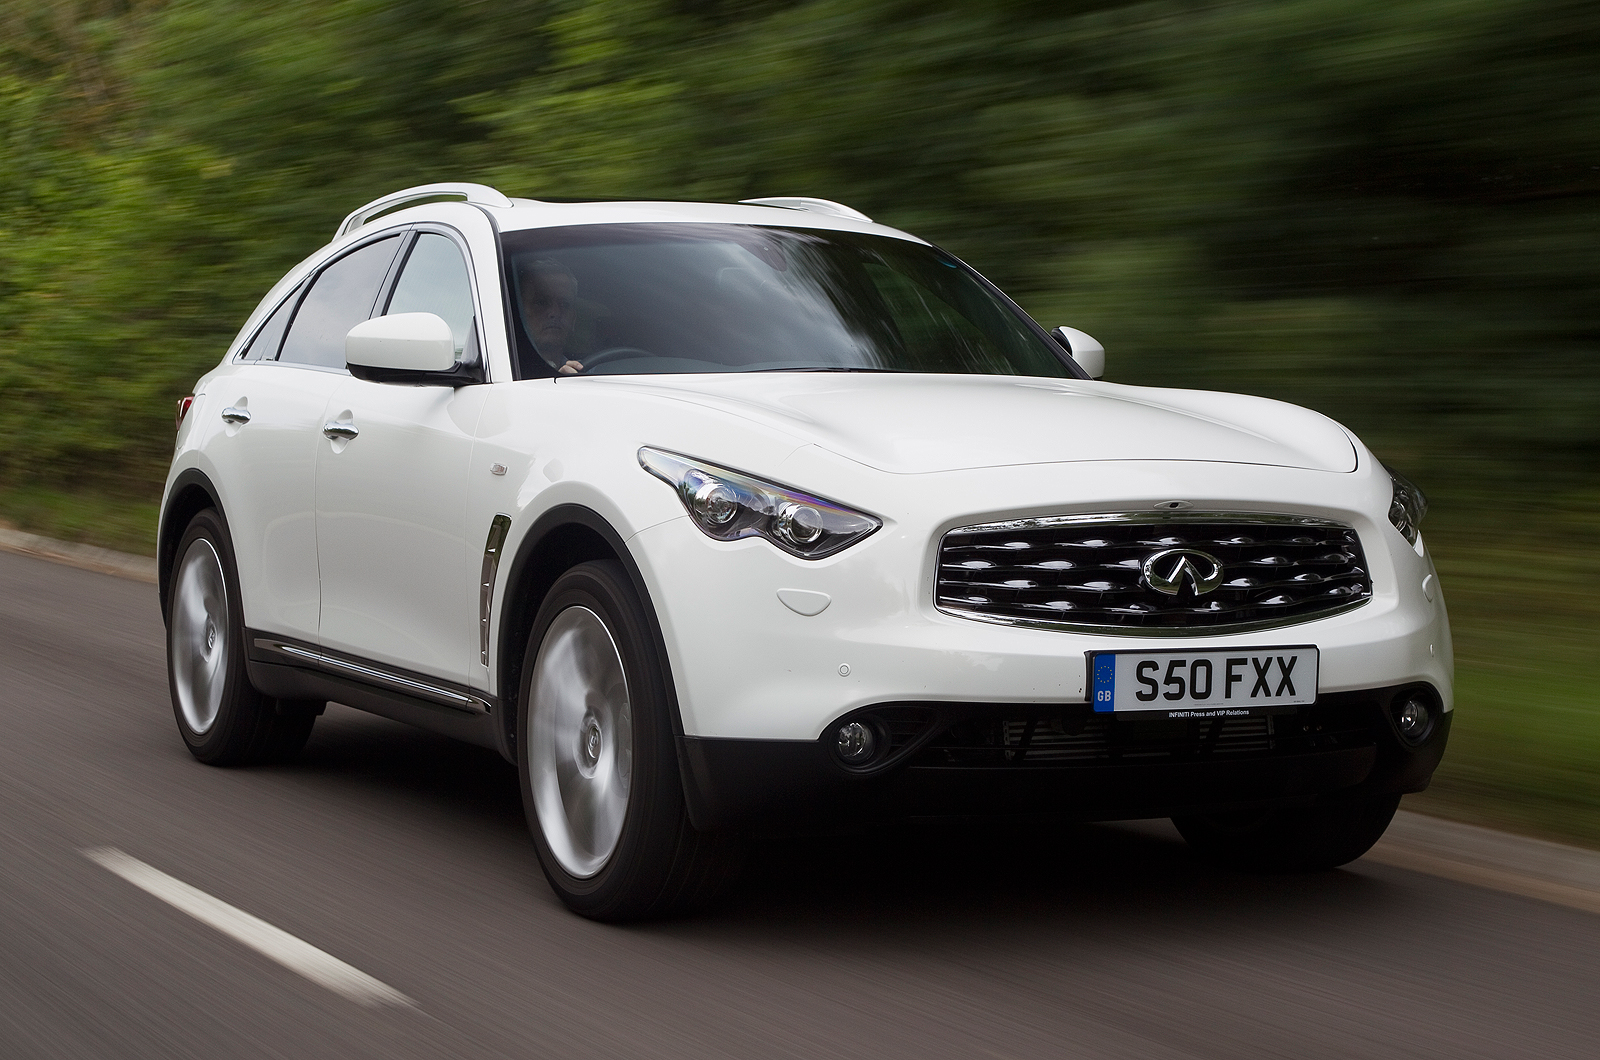 Infiniti Fx35 2013 Review, Amazing Pictures and Images